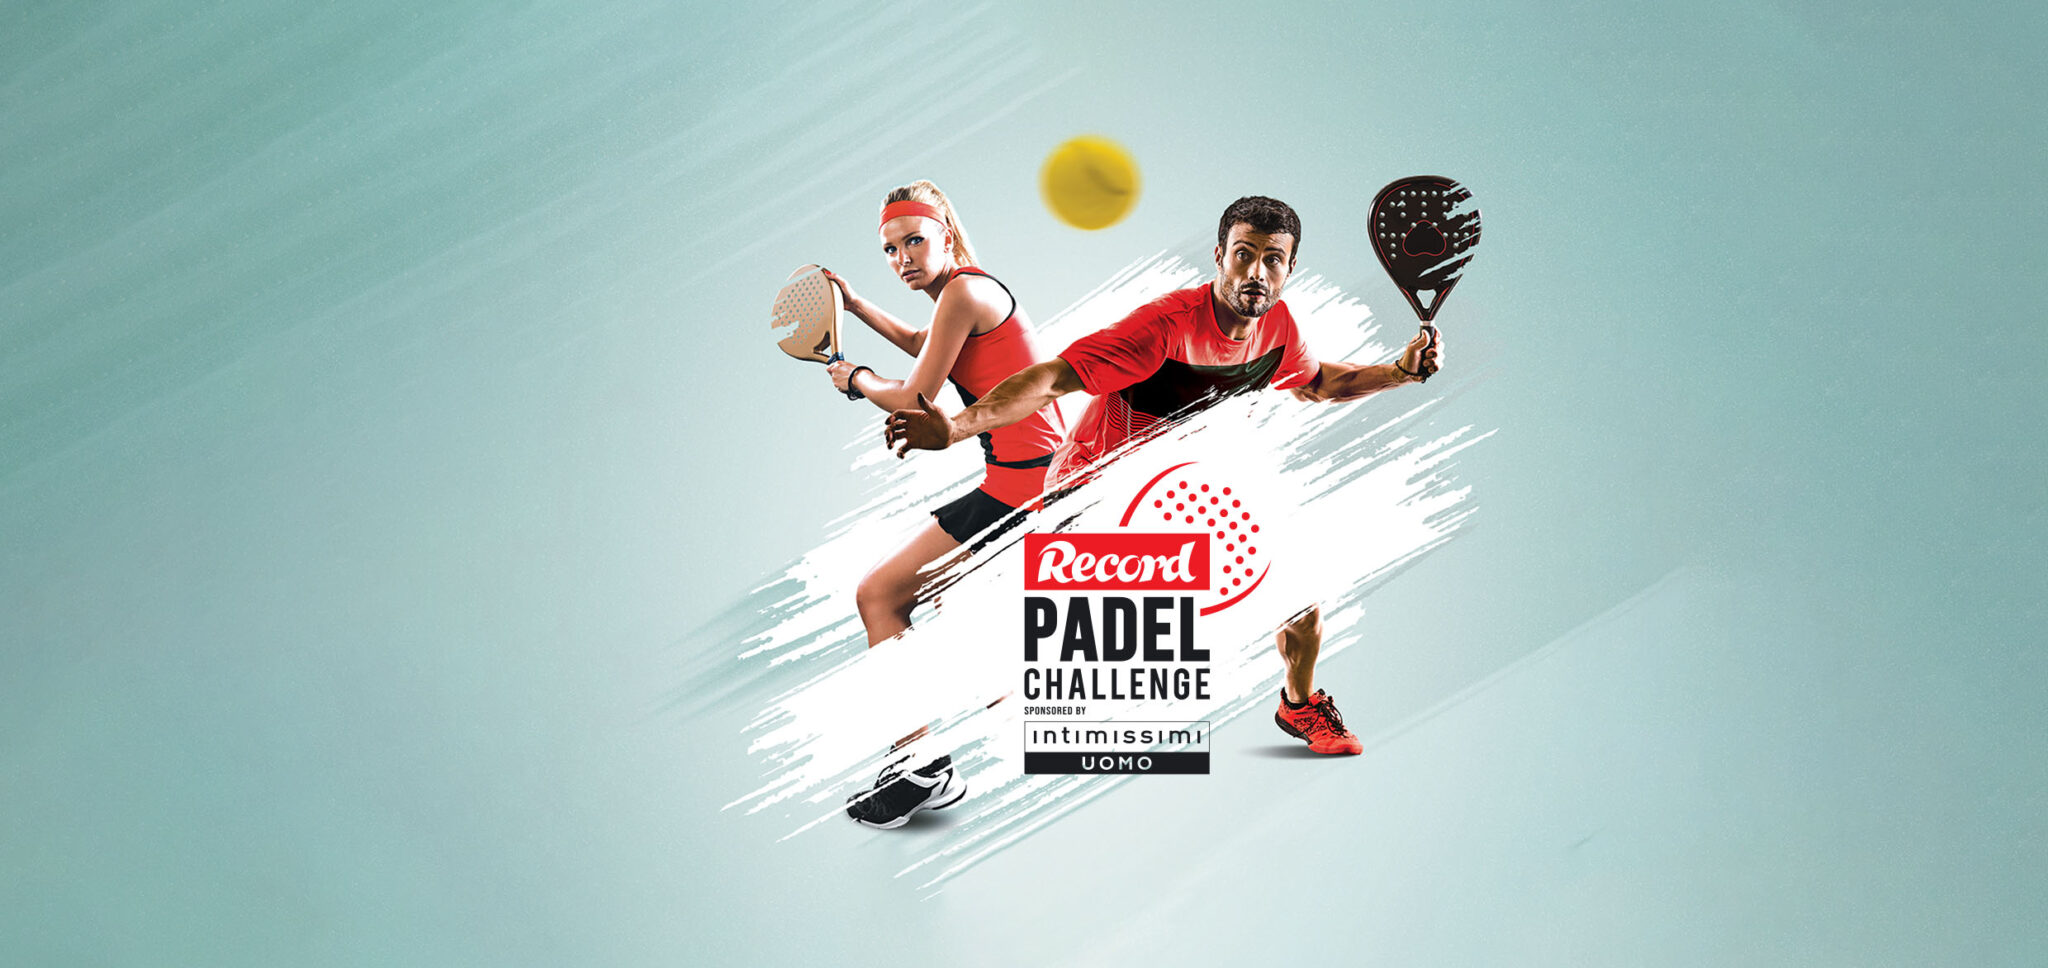 2a-edicao-do-record-padel-challenge-sponsored-by-intimissimi-uomo